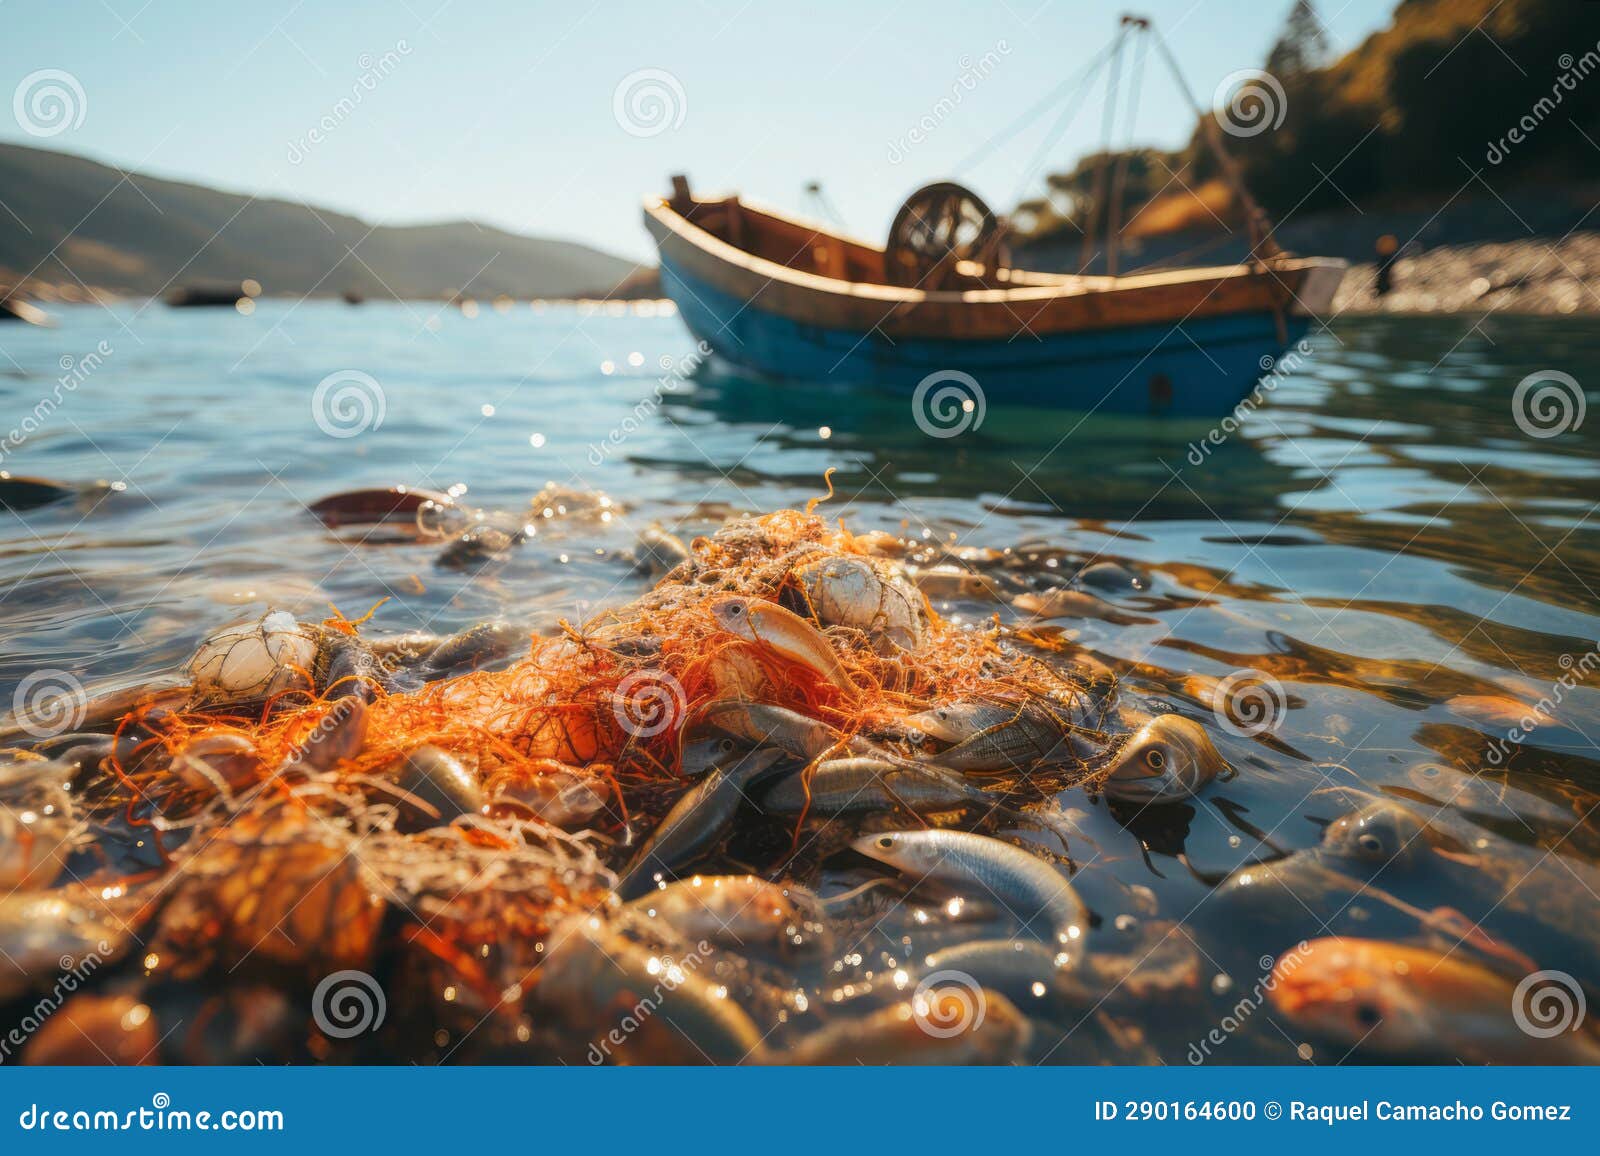 Fishing Net with Several Fishes Near a Small Fishing Boat. AI